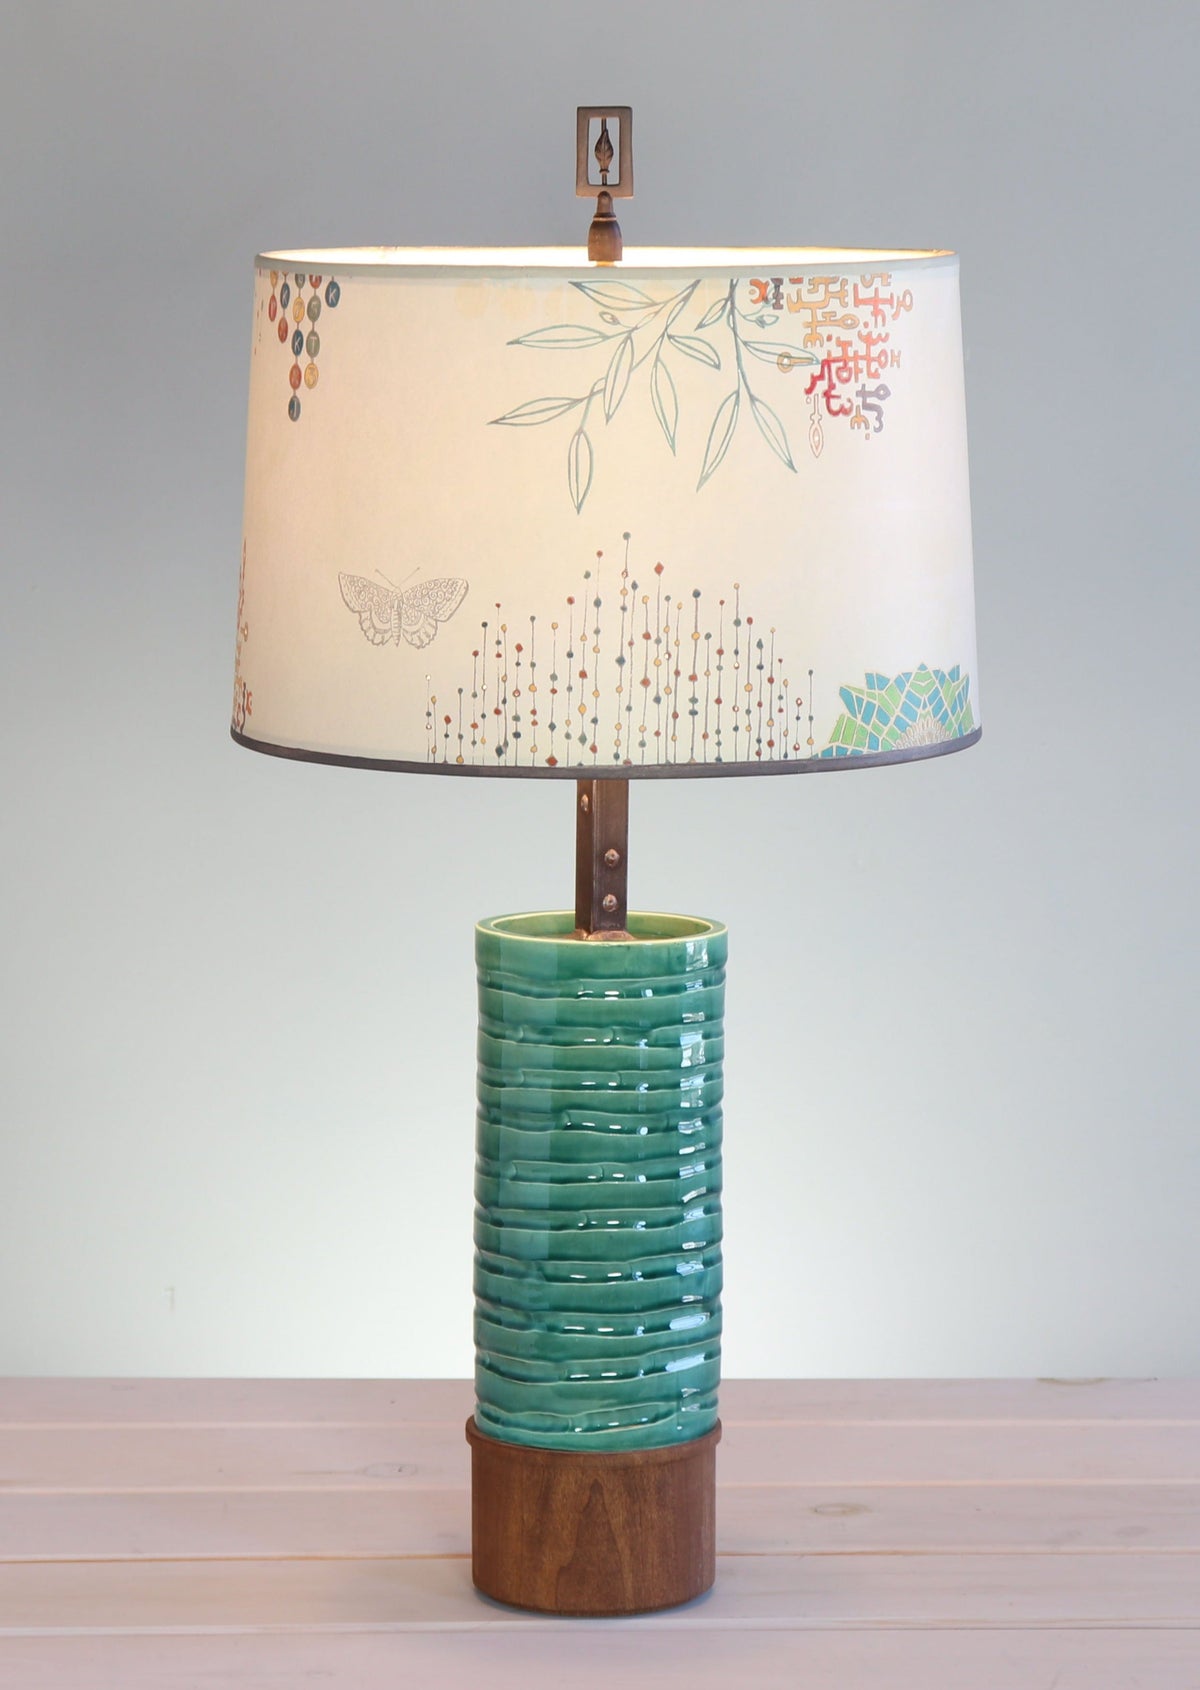 Ceramic and Wood Table Lamp with Large Drum Shade in Ecru Journey